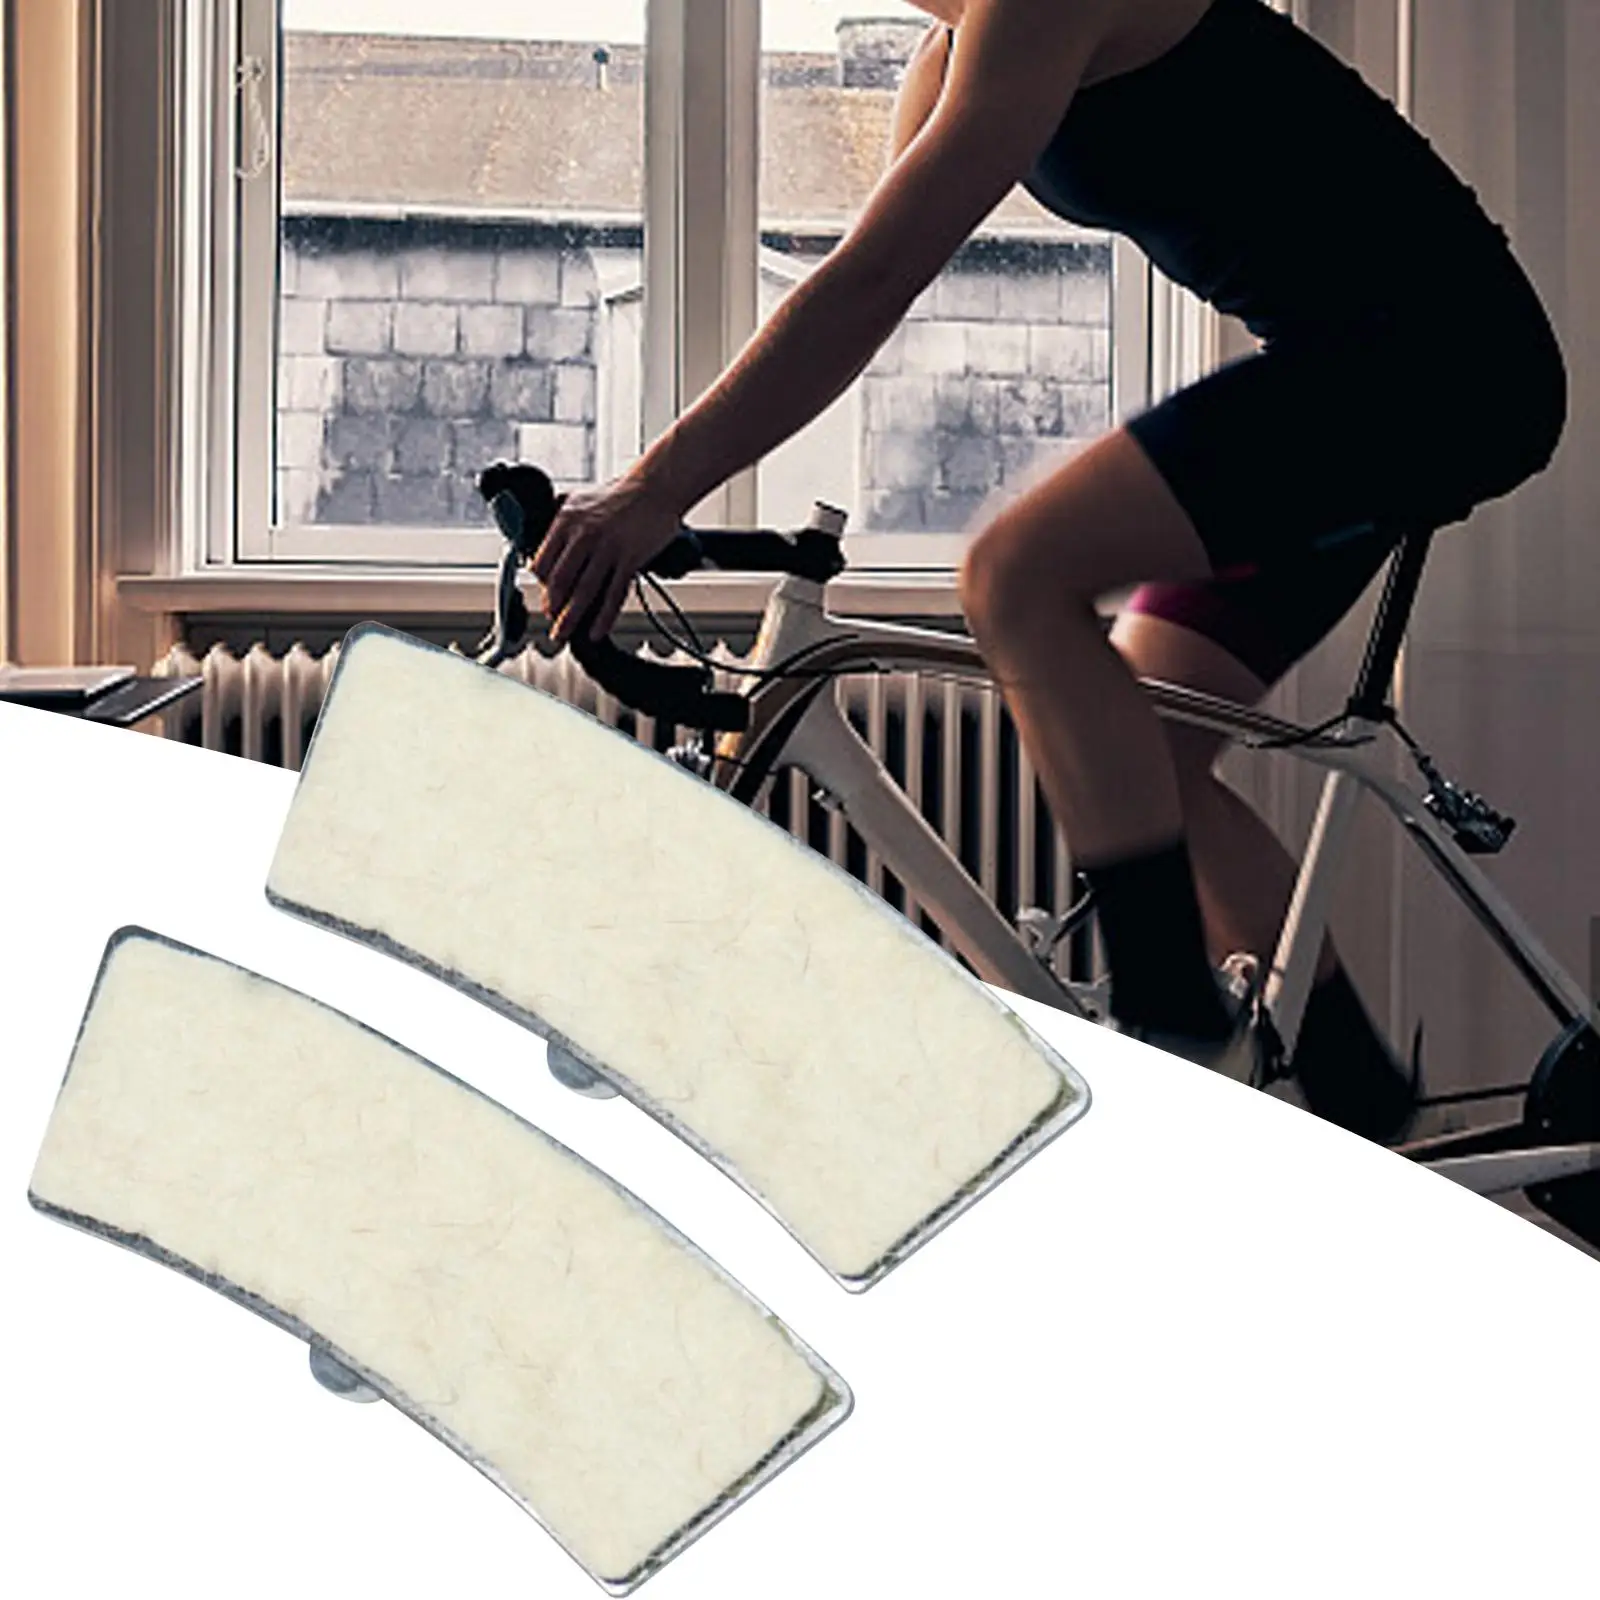 Brake Pad Replaces Accessories Caliper Friction Cotton Felt Easy Installation Exercise Bike Parts Spinnings Bike Pad for Fitness